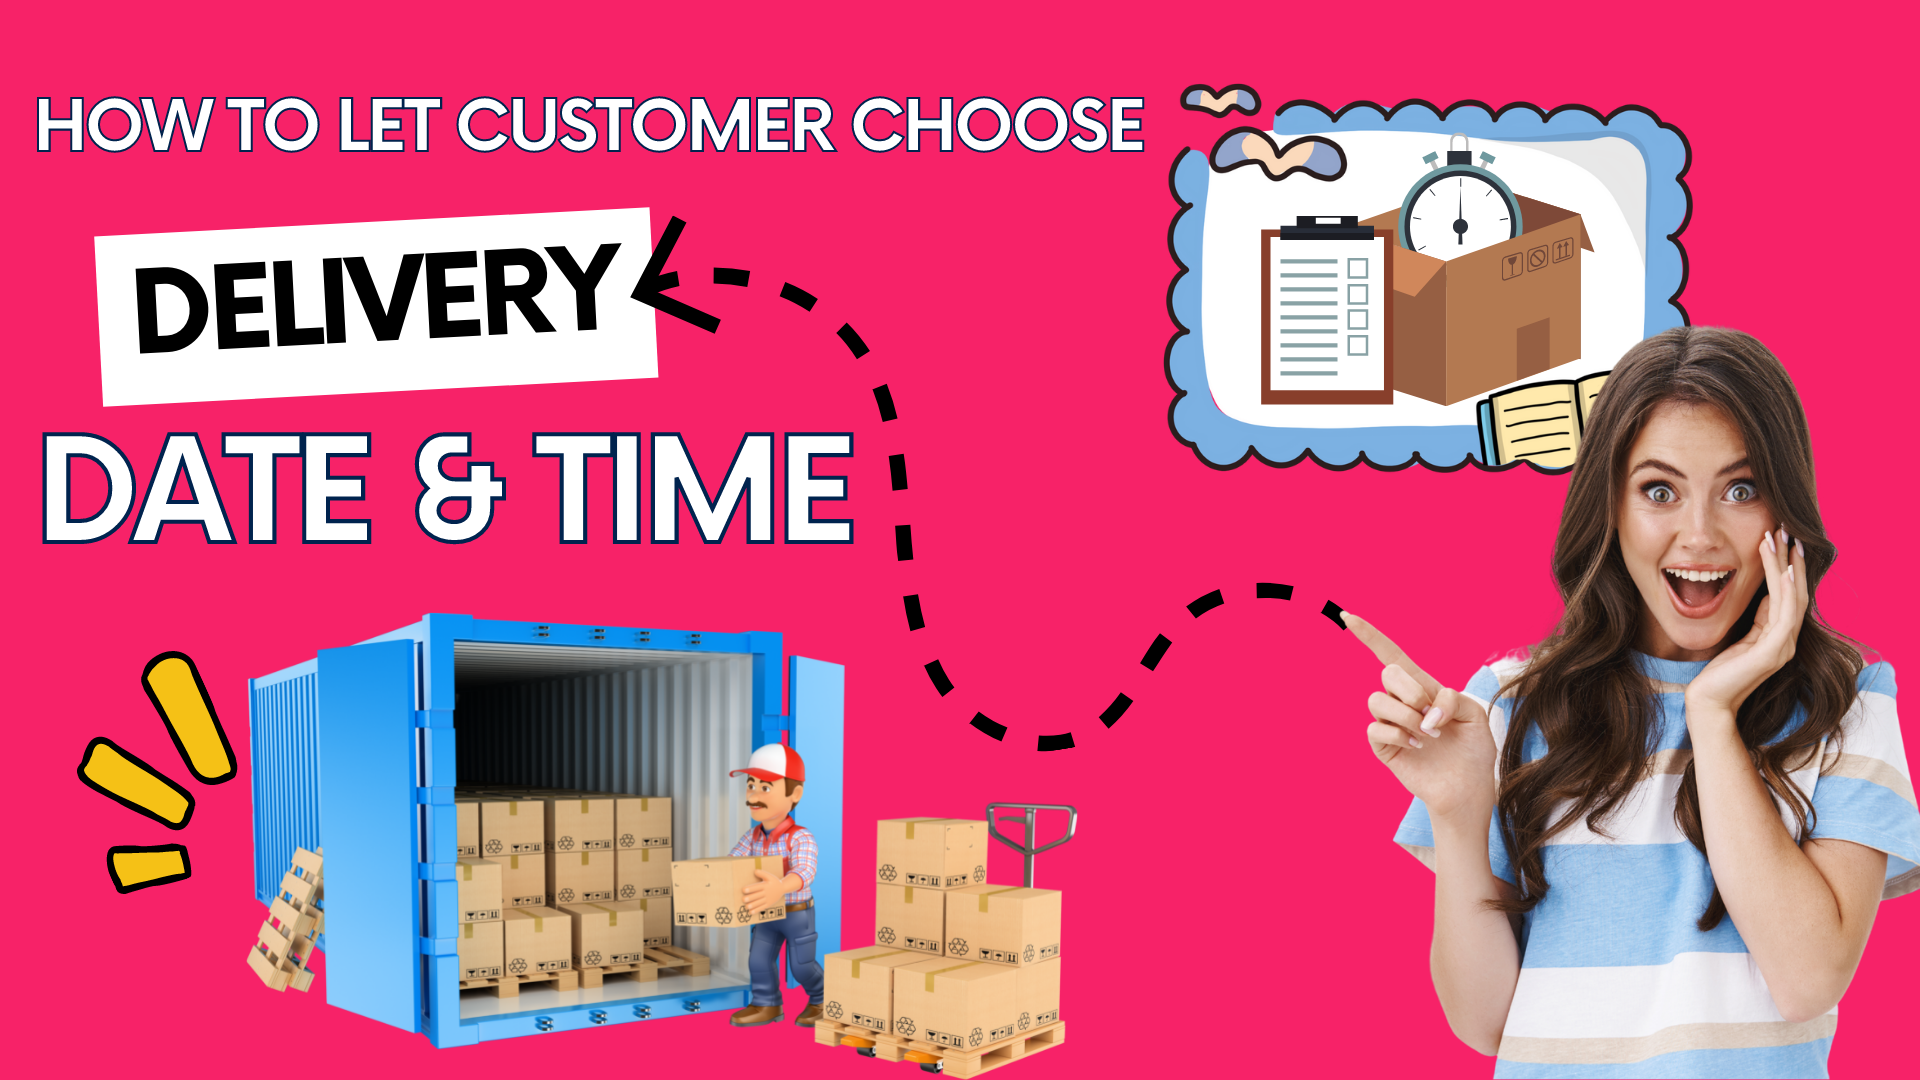 scheduled delivery, let customer to choose delivery date&time